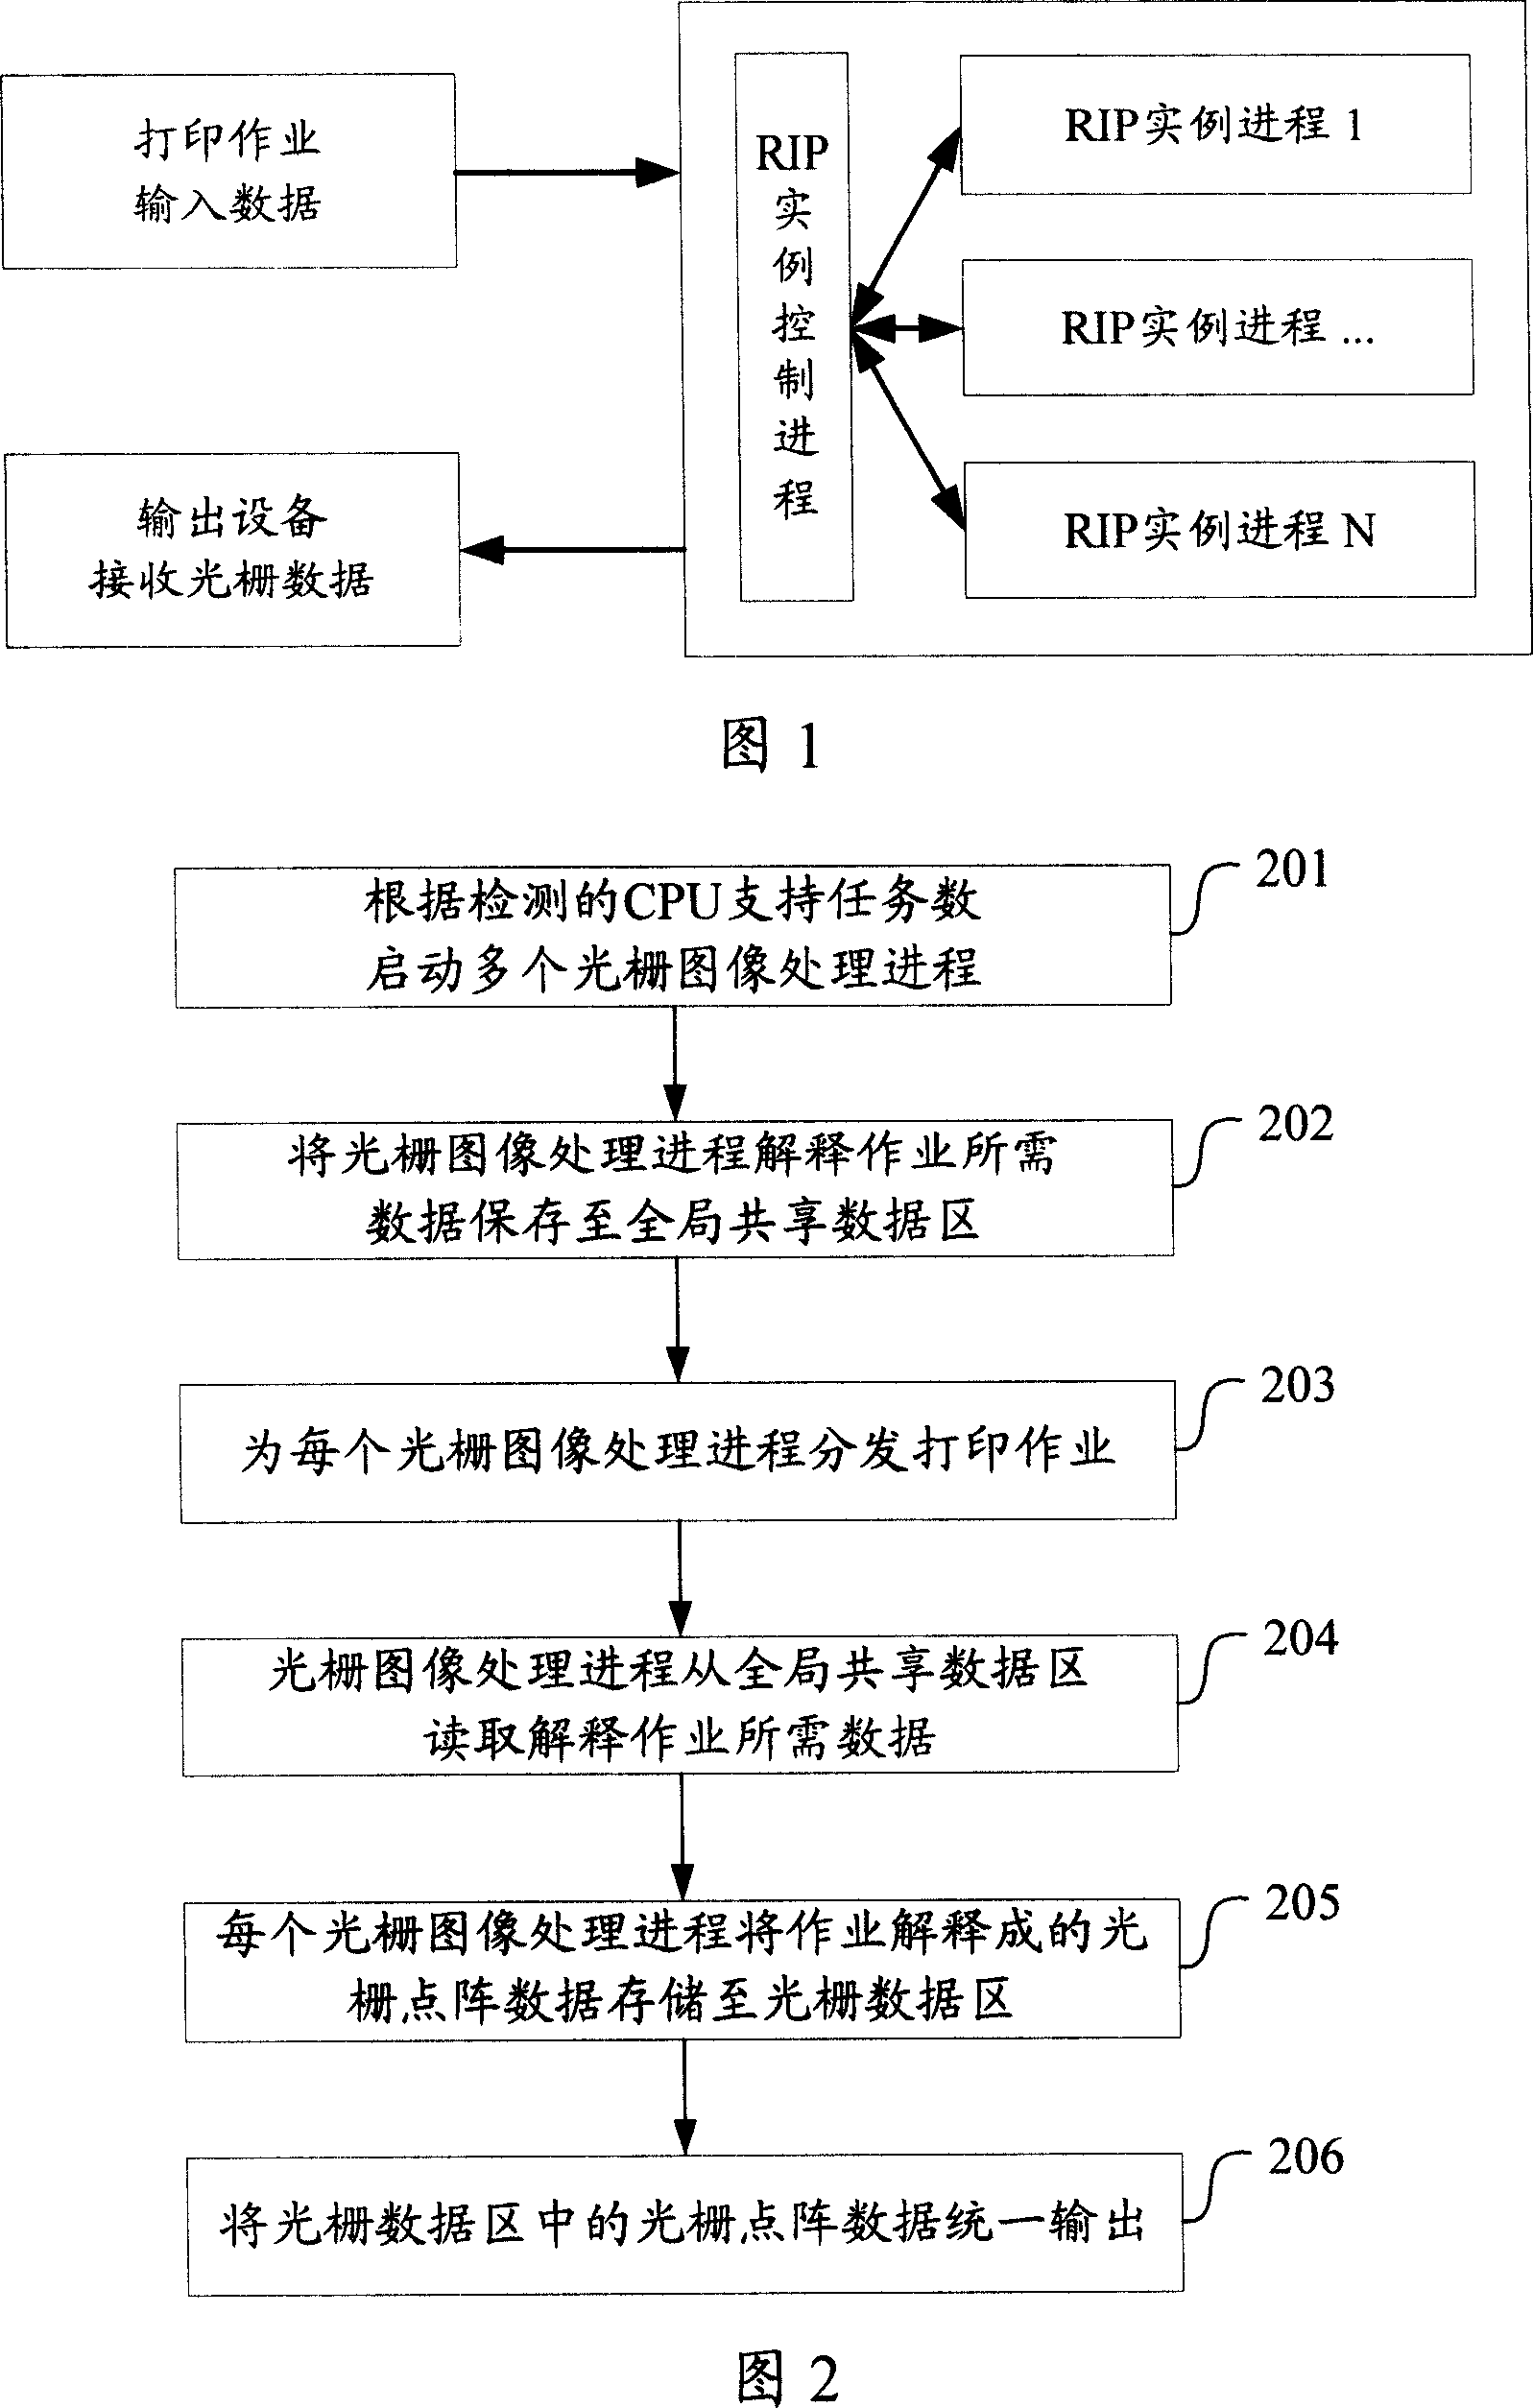 Parallel grating image processing method and system